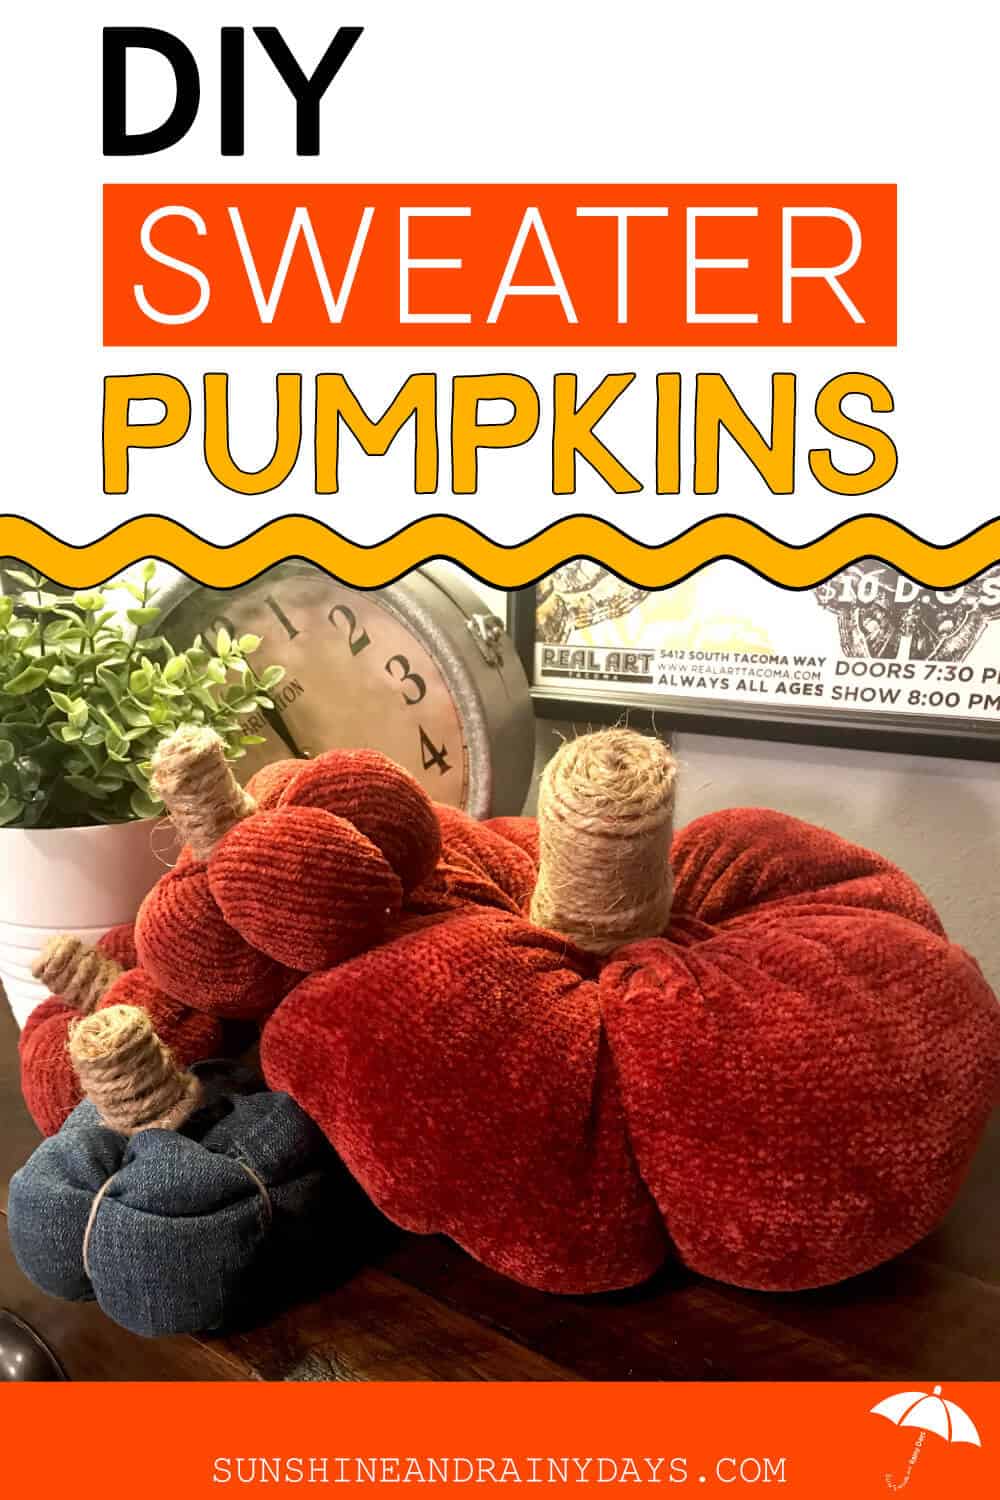 Sweater Pumpkins made from an old sweater